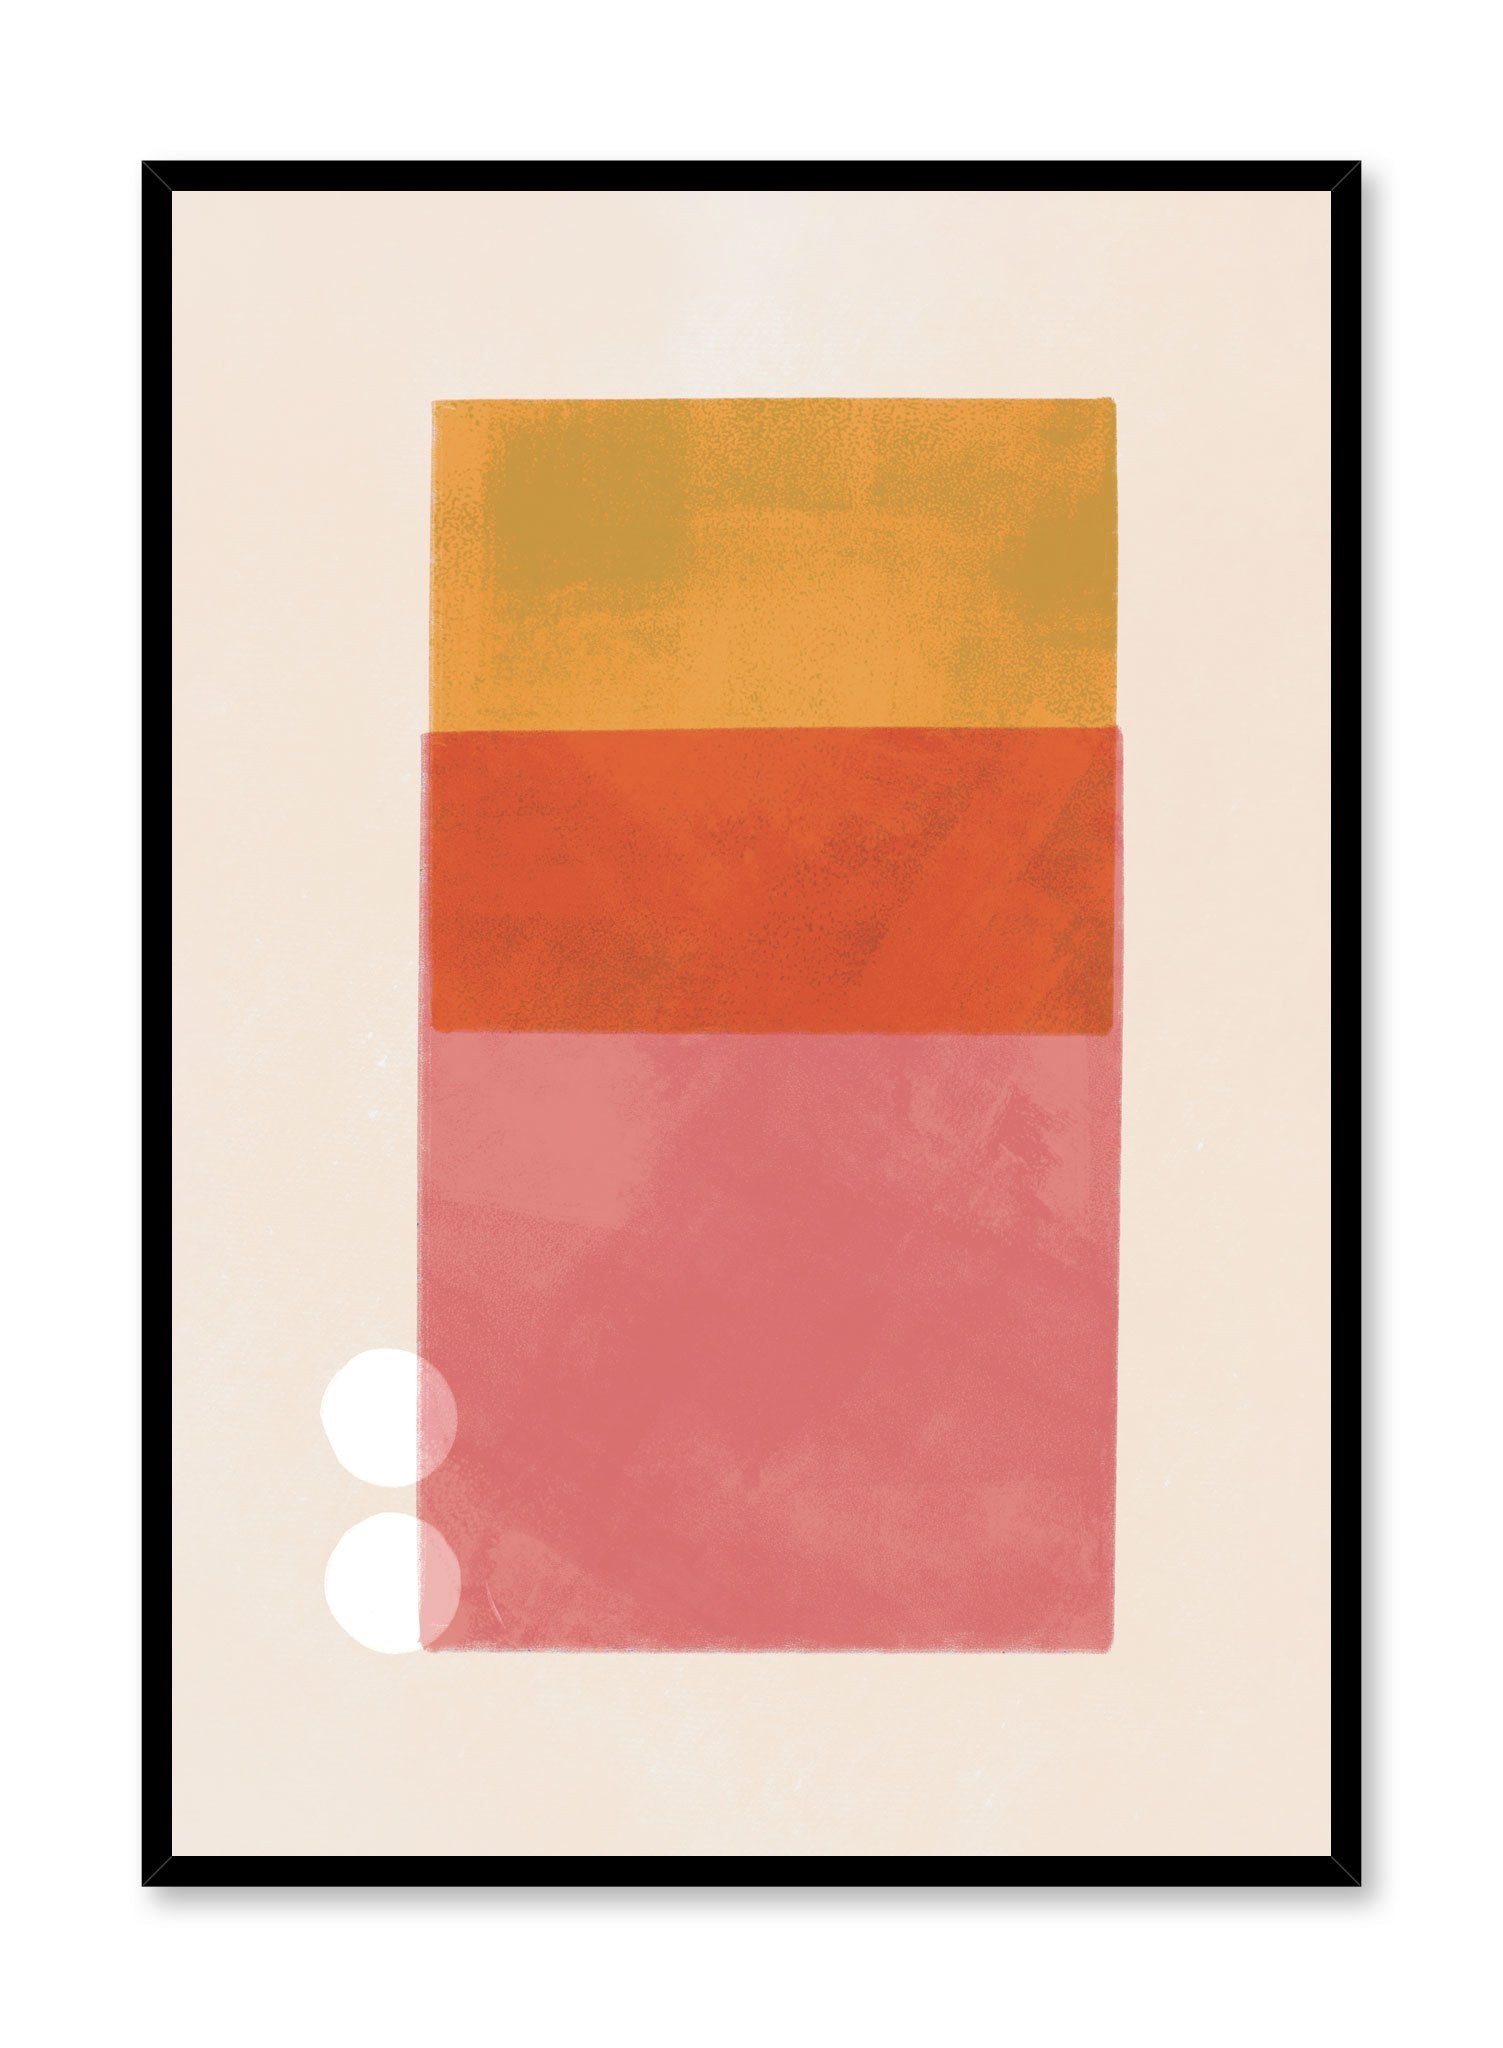 Modern minimalist poster by Opposite Wall with abstract design of Townhouse by Toffie Affichiste